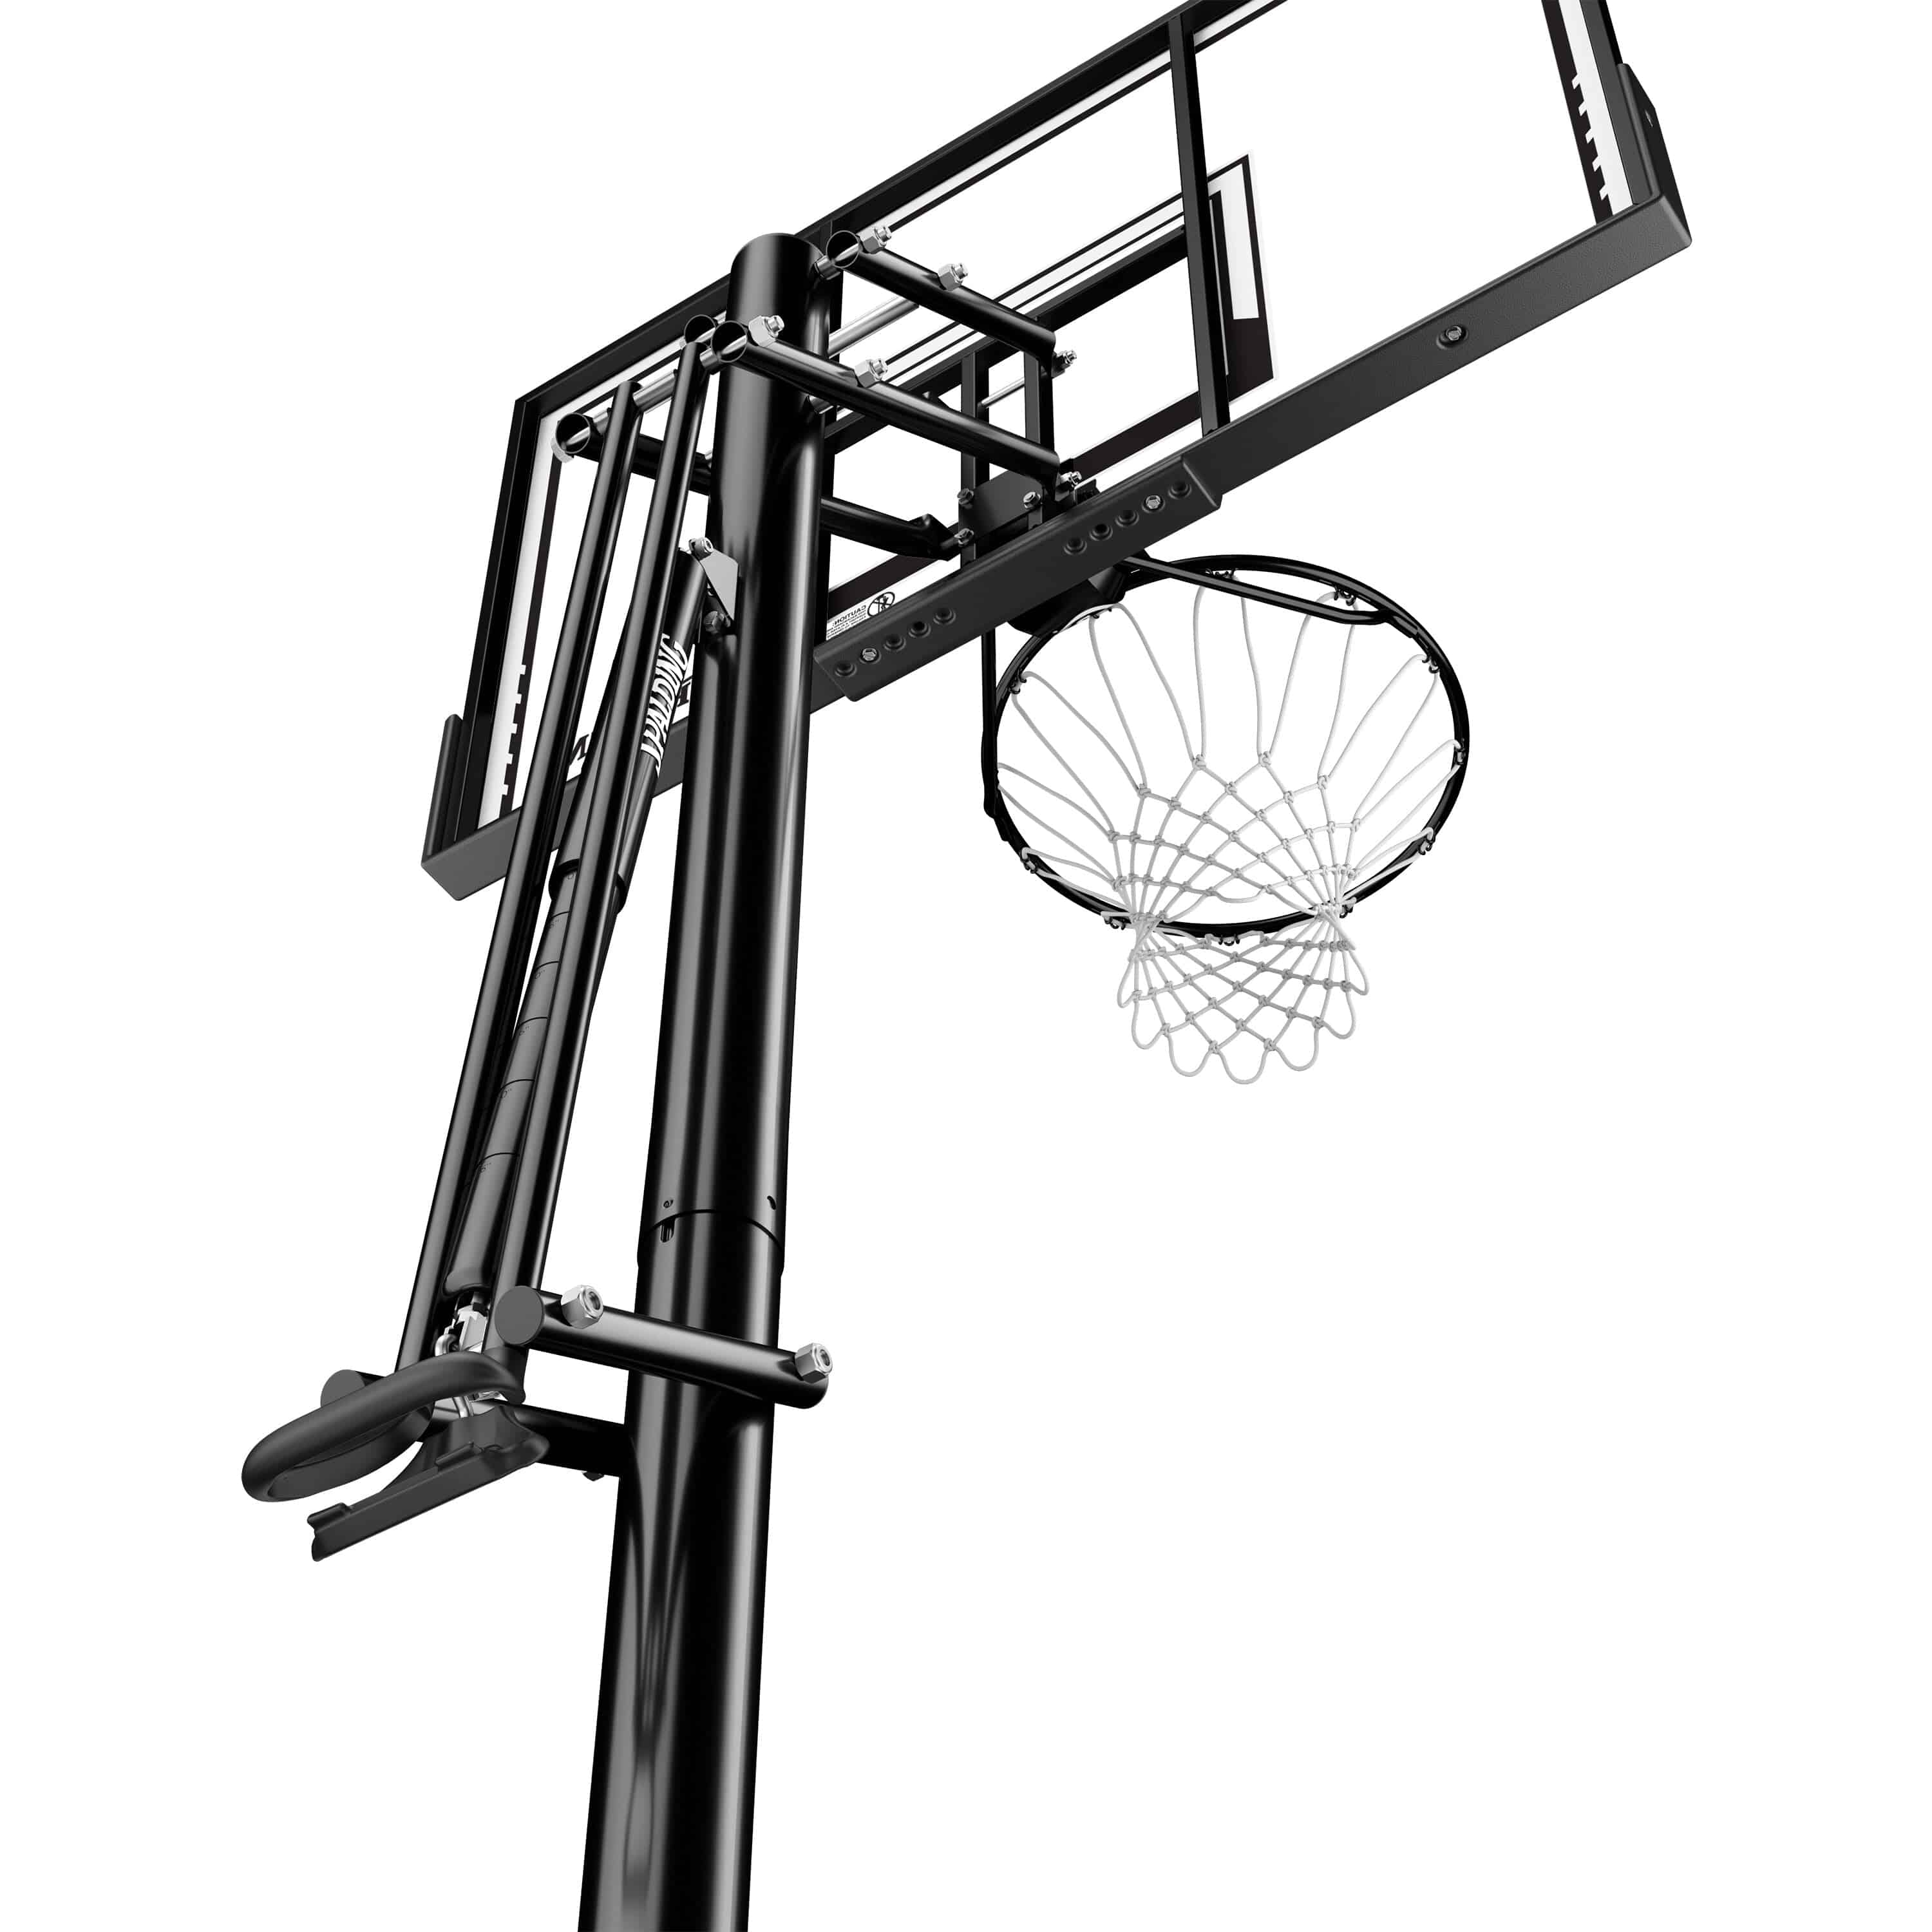 Spalding Accuglide Lift In-Ground Hoop With 52-Inch Acrylic Backboard